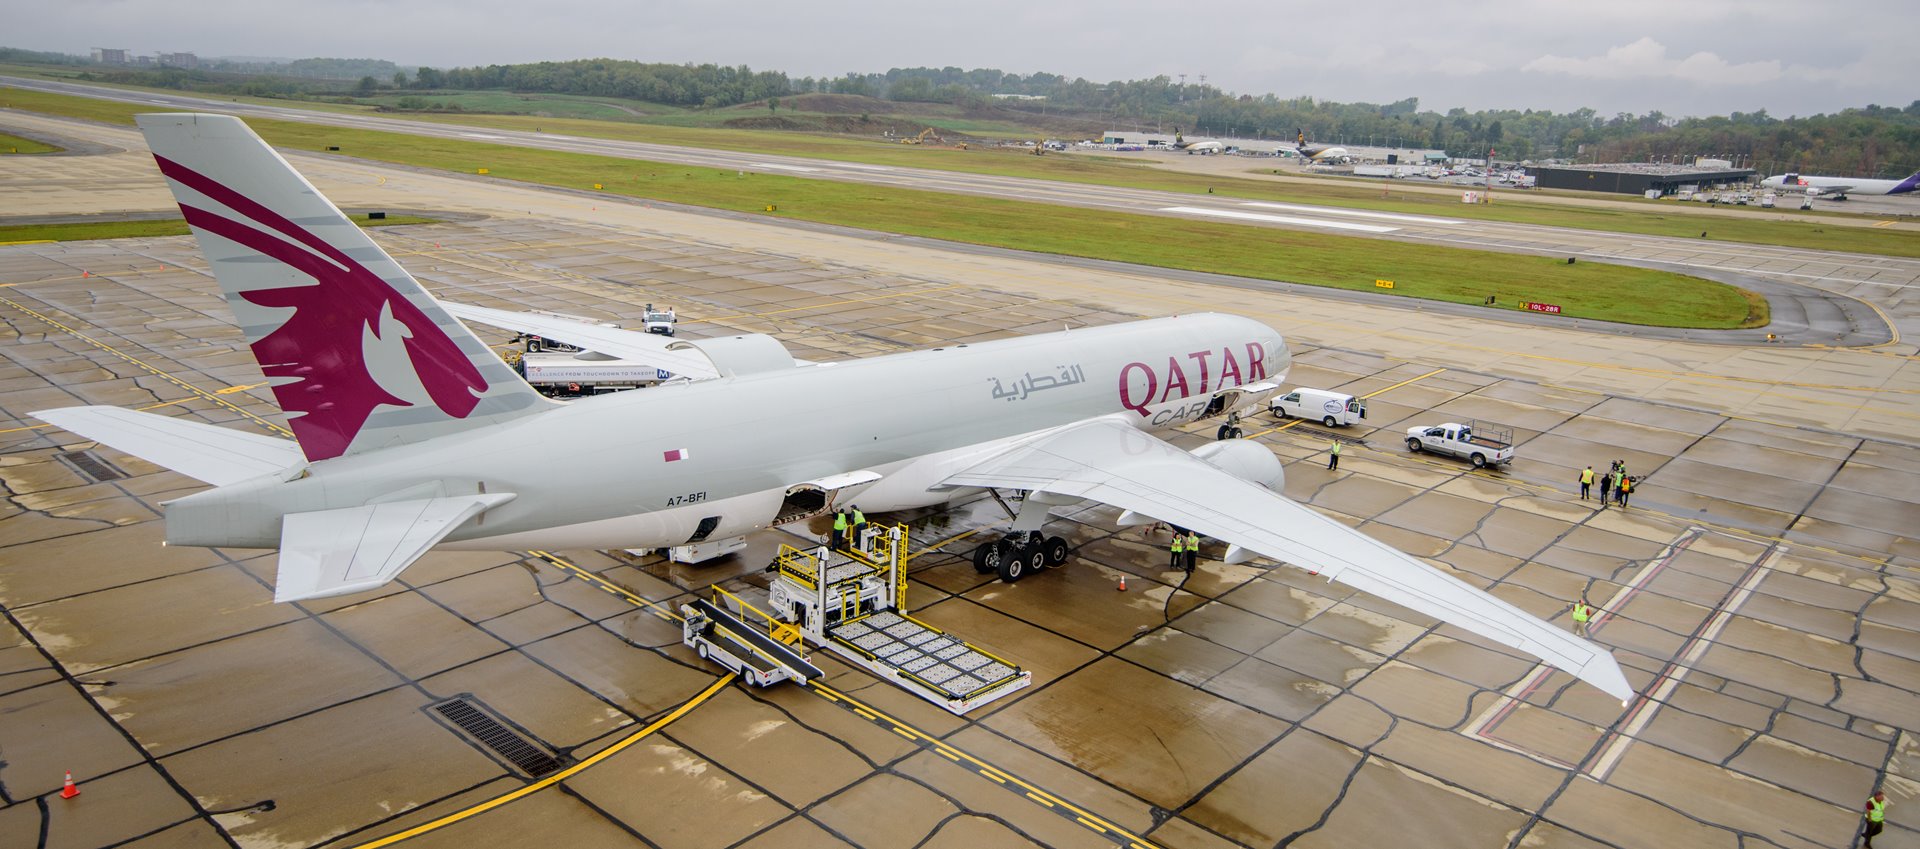 QATAR AIRWAYS CARGO’S INAUGURAL FREIGHTER TOUCHES DOWN IN PITTSBURGH